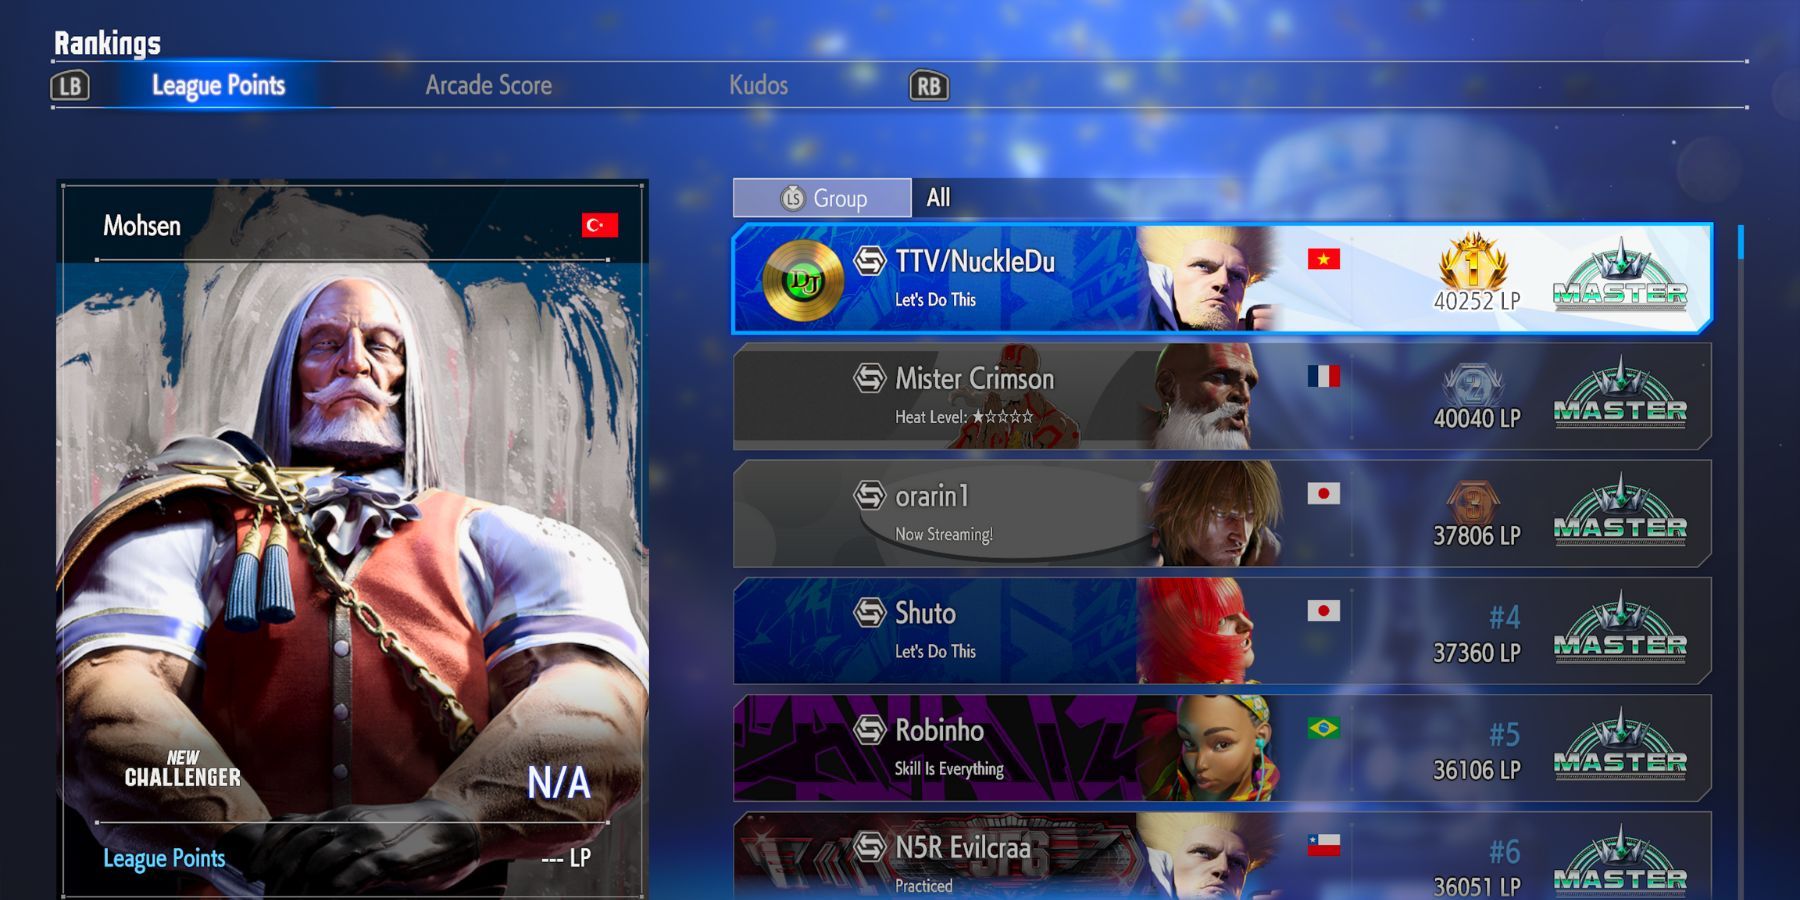 image showing the ranking list in street fighter 6.